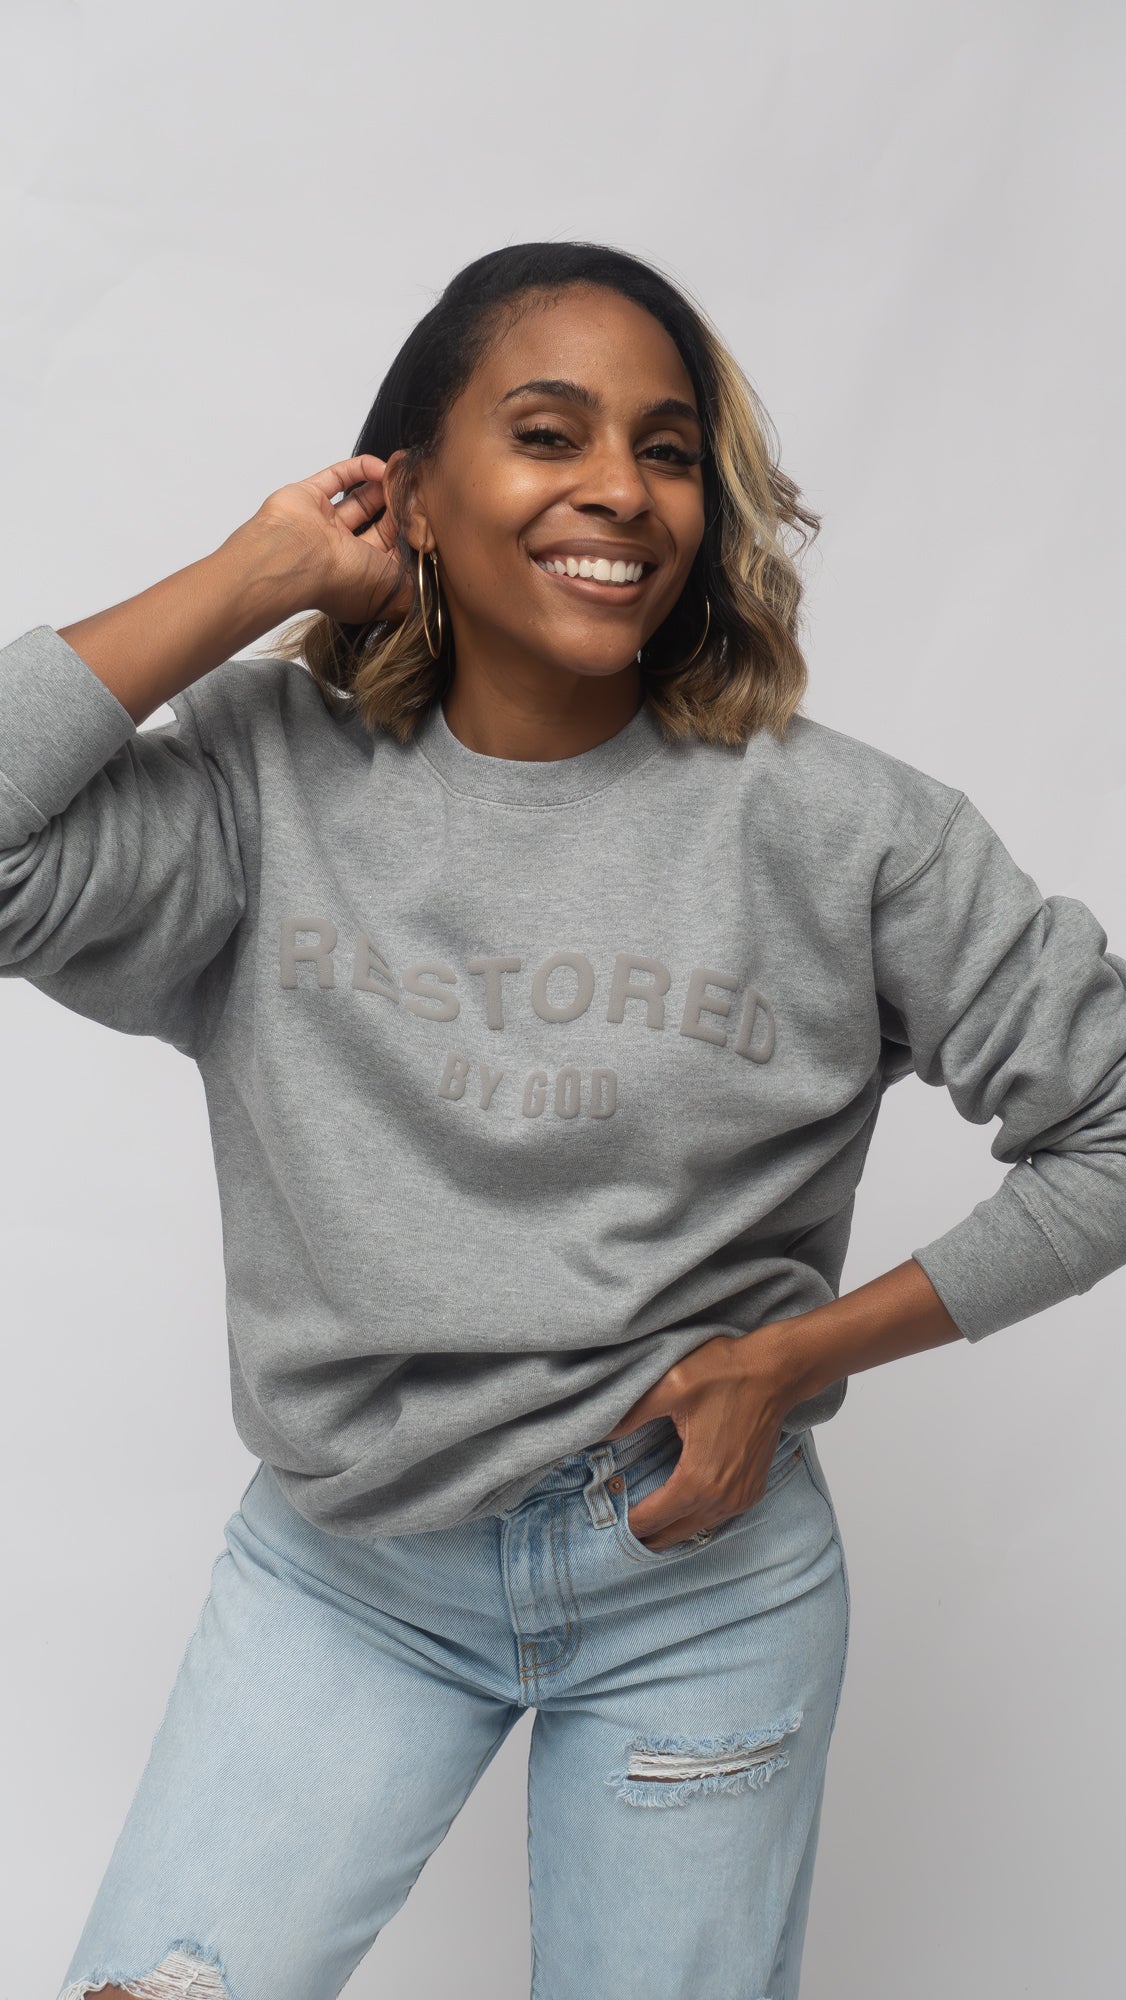 Restored by god grey christian streetwear unisex crewneck sweatshirt for fall weather in the color grey